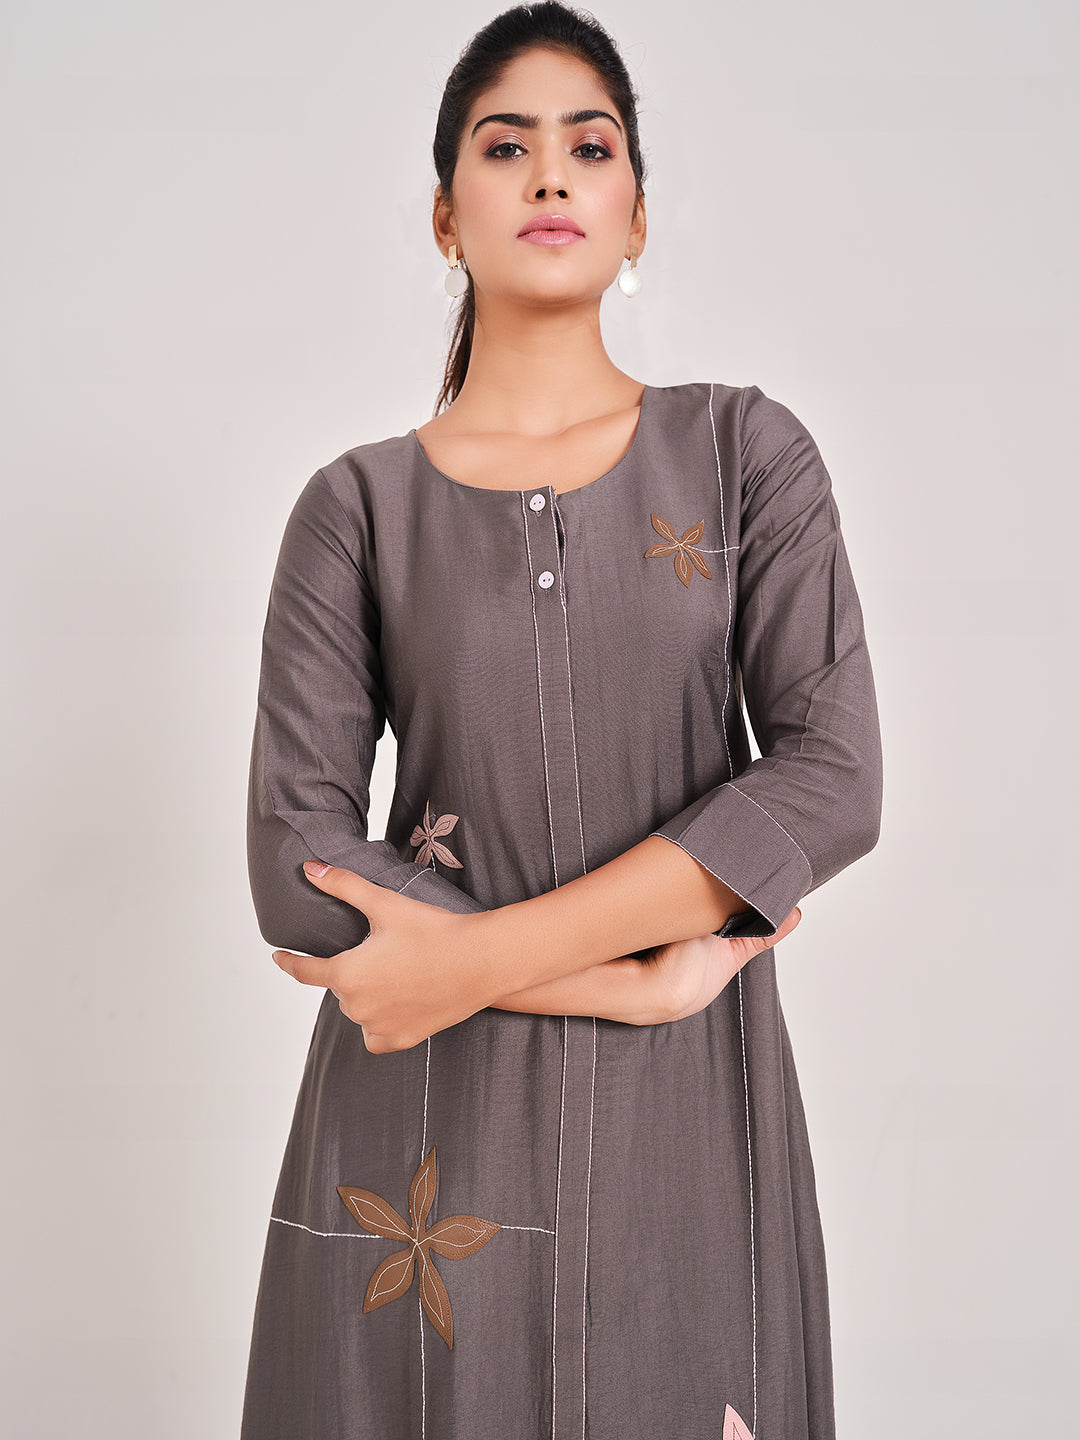 Rosy Brown Patch Work Dress - ARH827